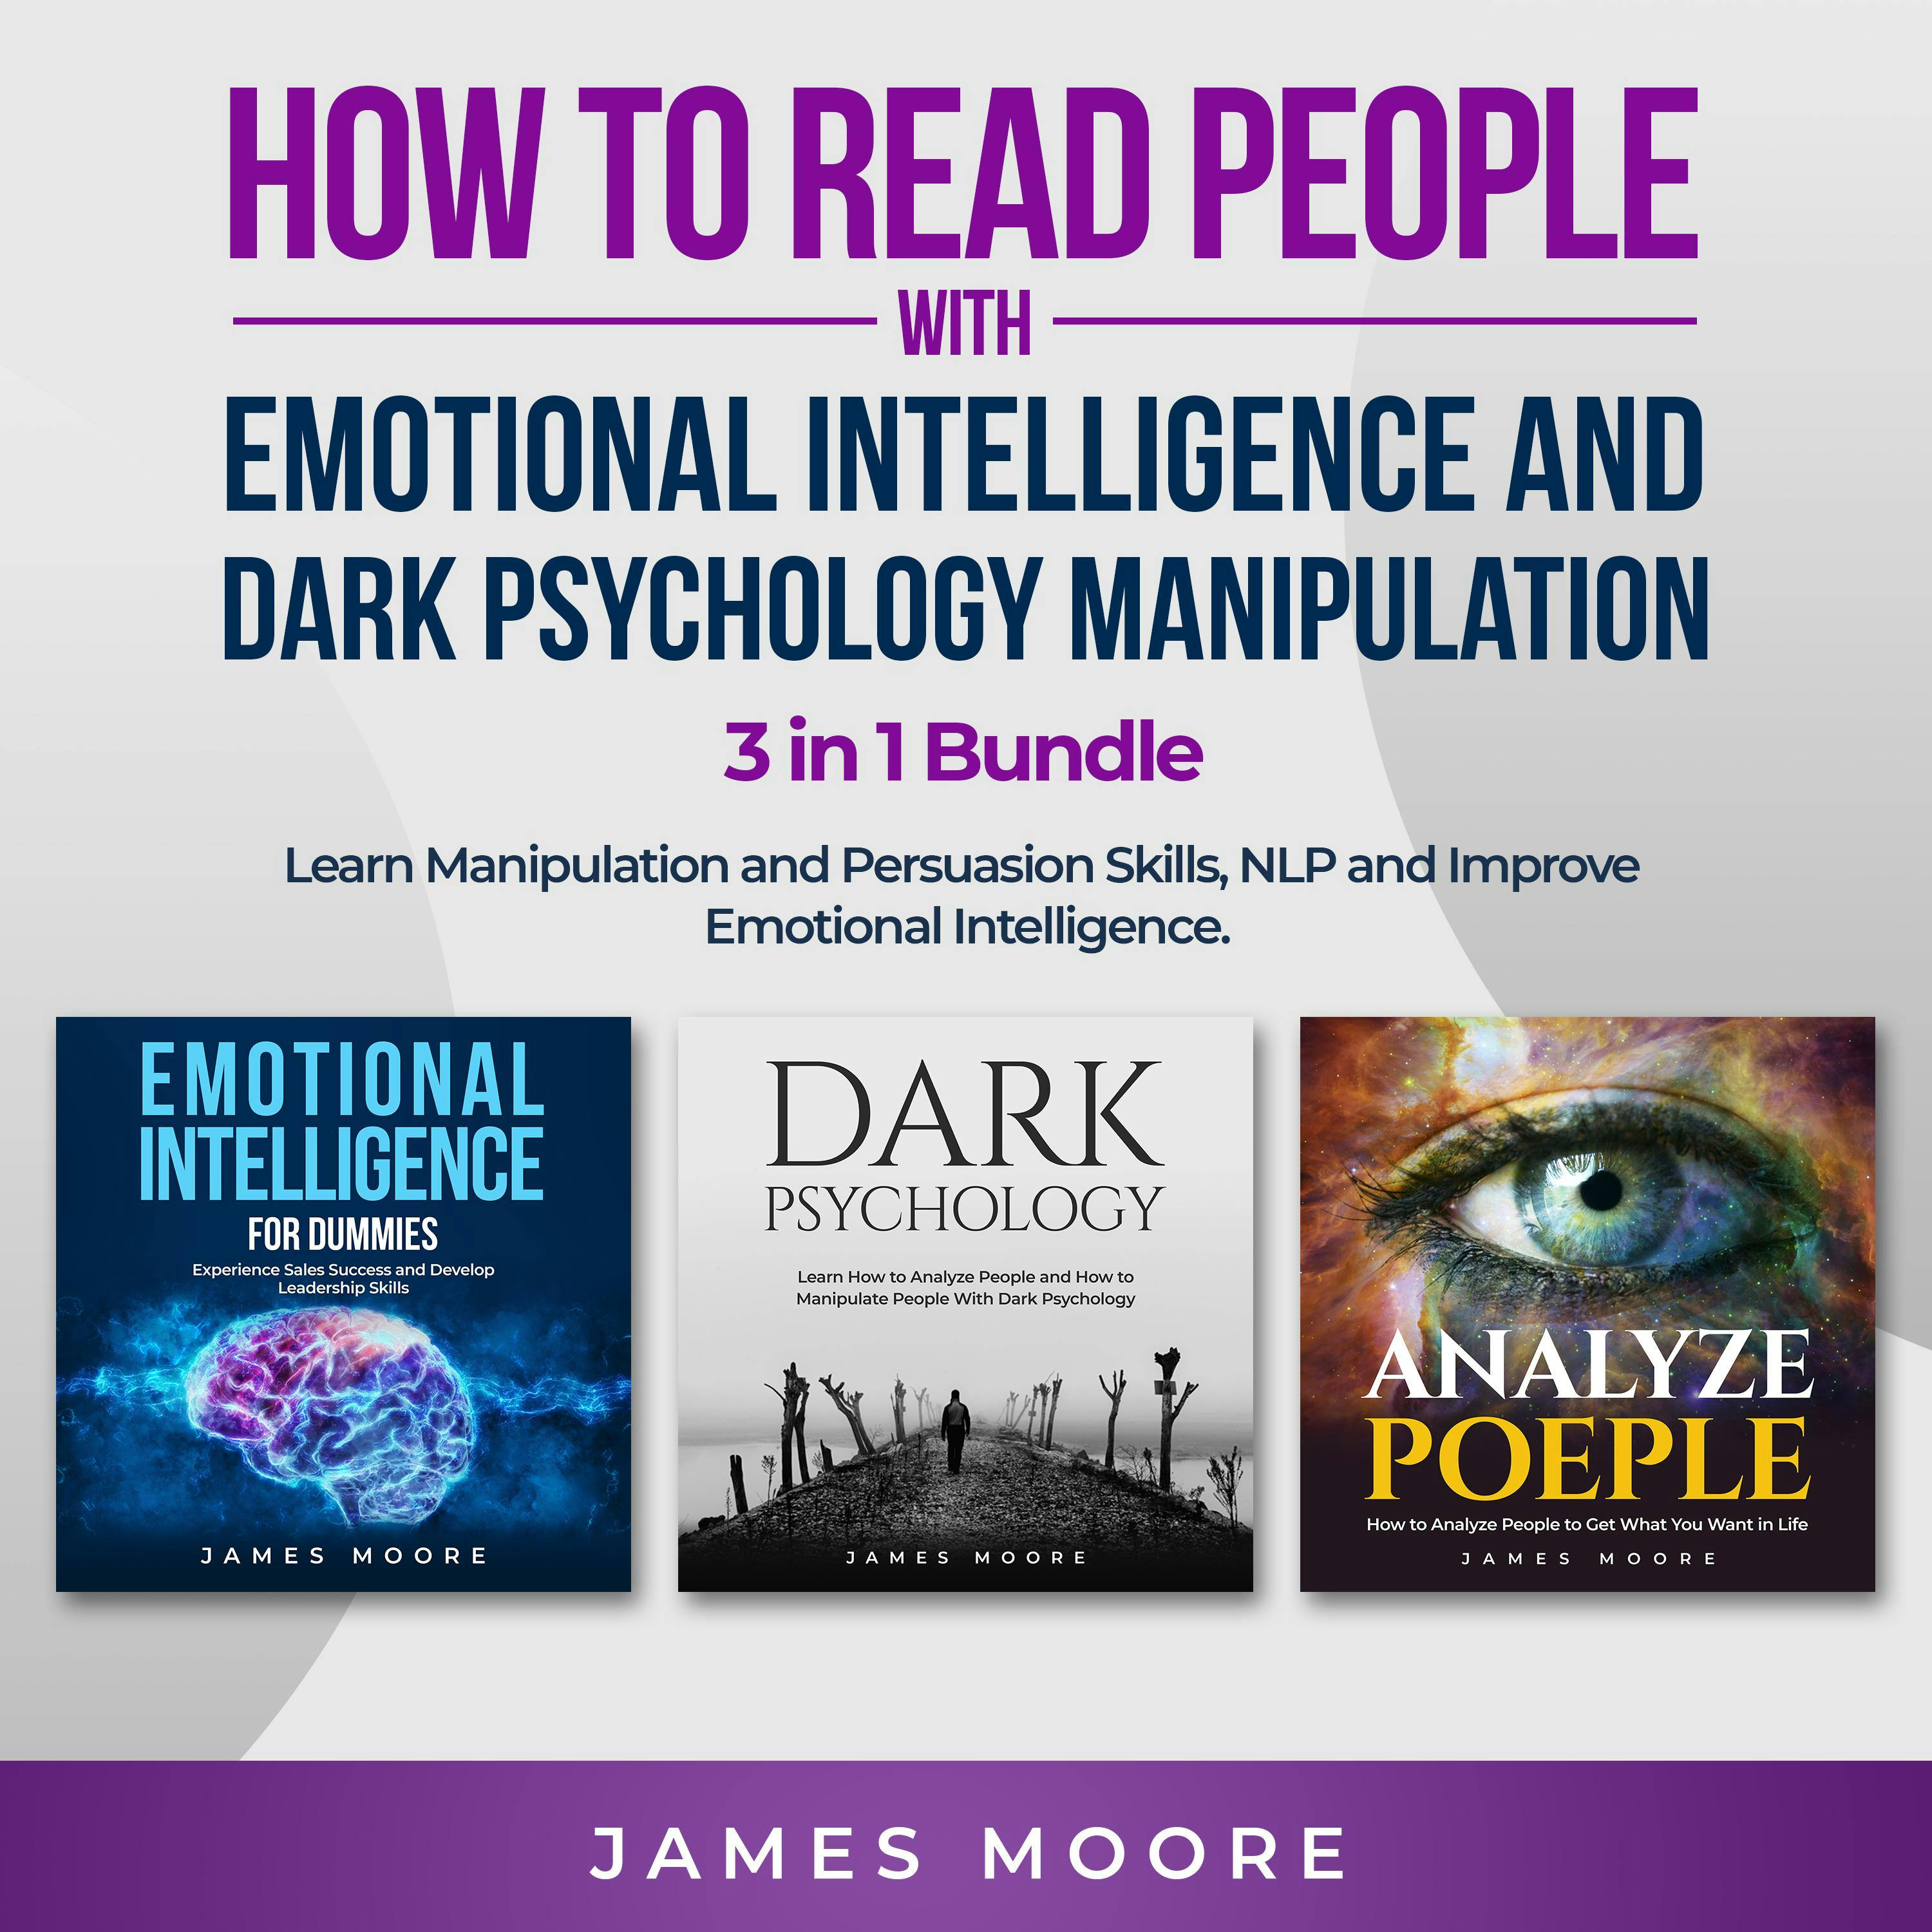 How to Read People with Emotional Intelligence and Dark Psychology Manipulation 3 in 1 Bundle: Learn Manipulation and Persuasion Skills, NLP and Improve Emotional Intelligence - undefined